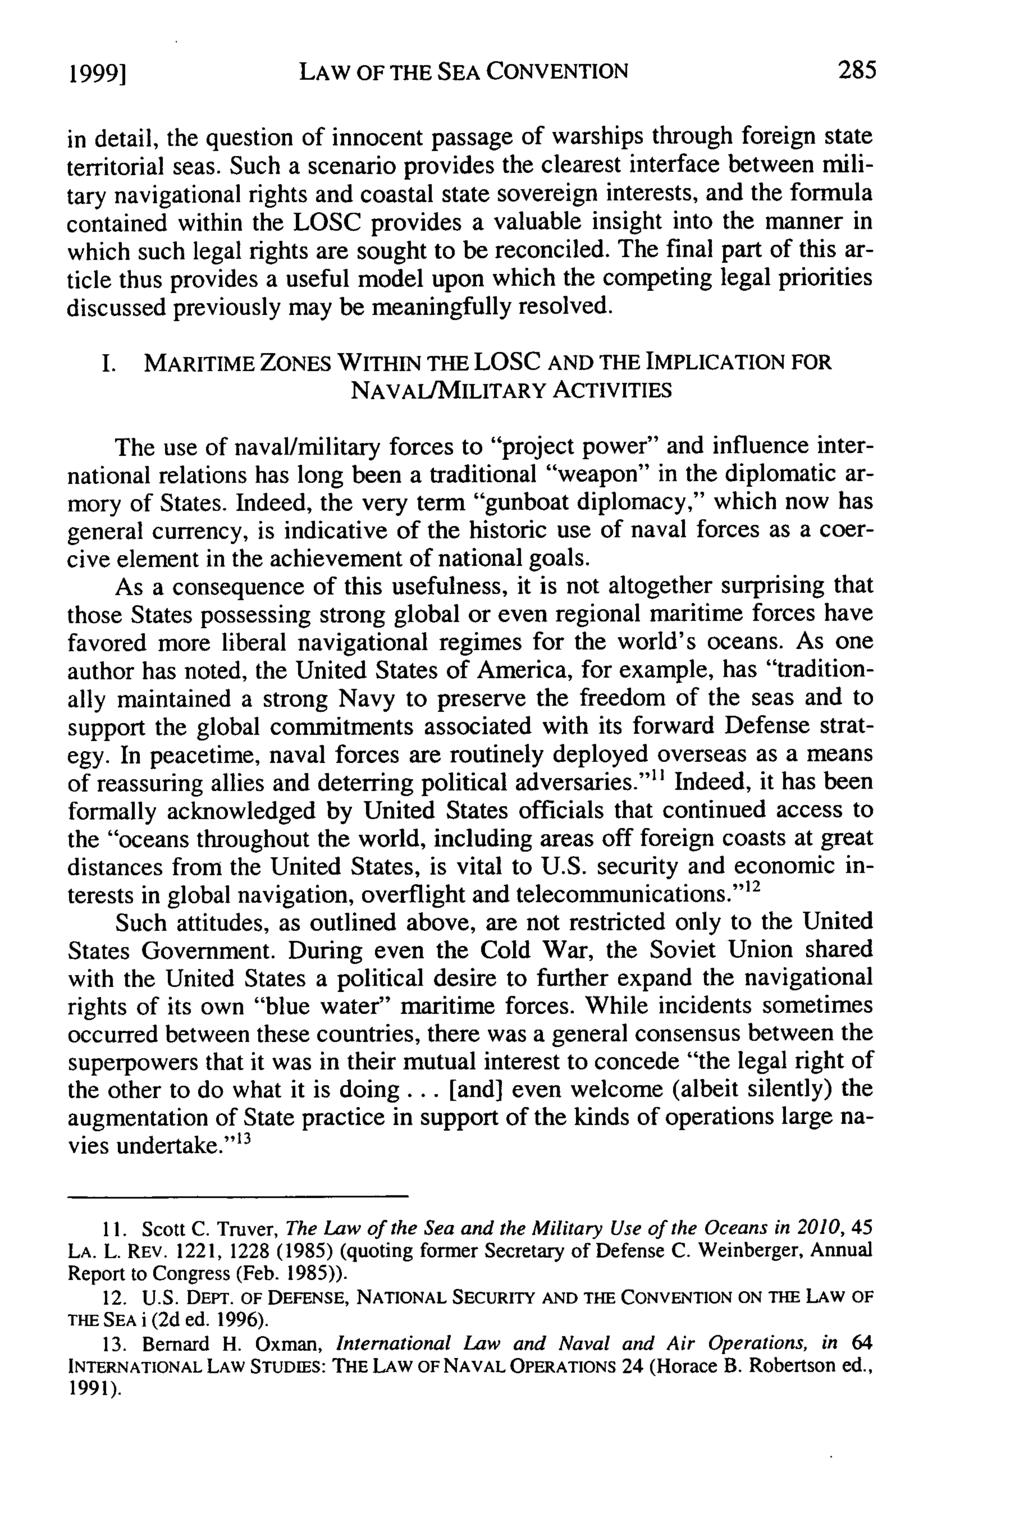 1999] Stephens: The Impact of the 1982 Law of the Sea Convention on the Conduct o LAW OF THE SEA CONVENTION in detail, the question of innocent passage of warships through foreign state territorial